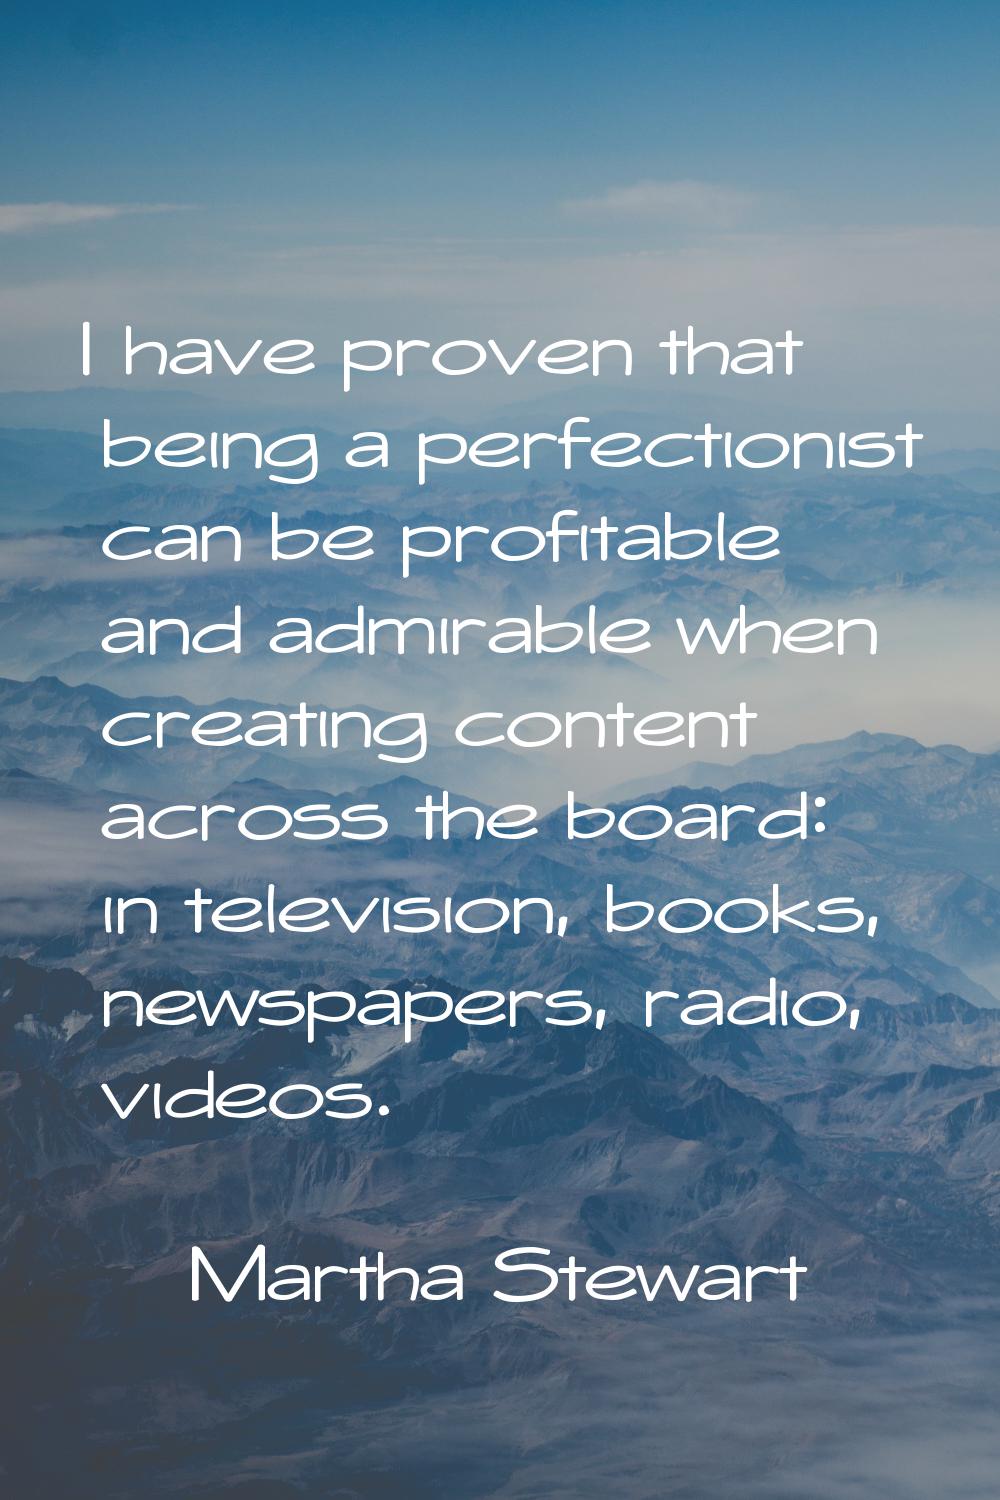 I have proven that being a perfectionist can be profitable and admirable when creating content acro